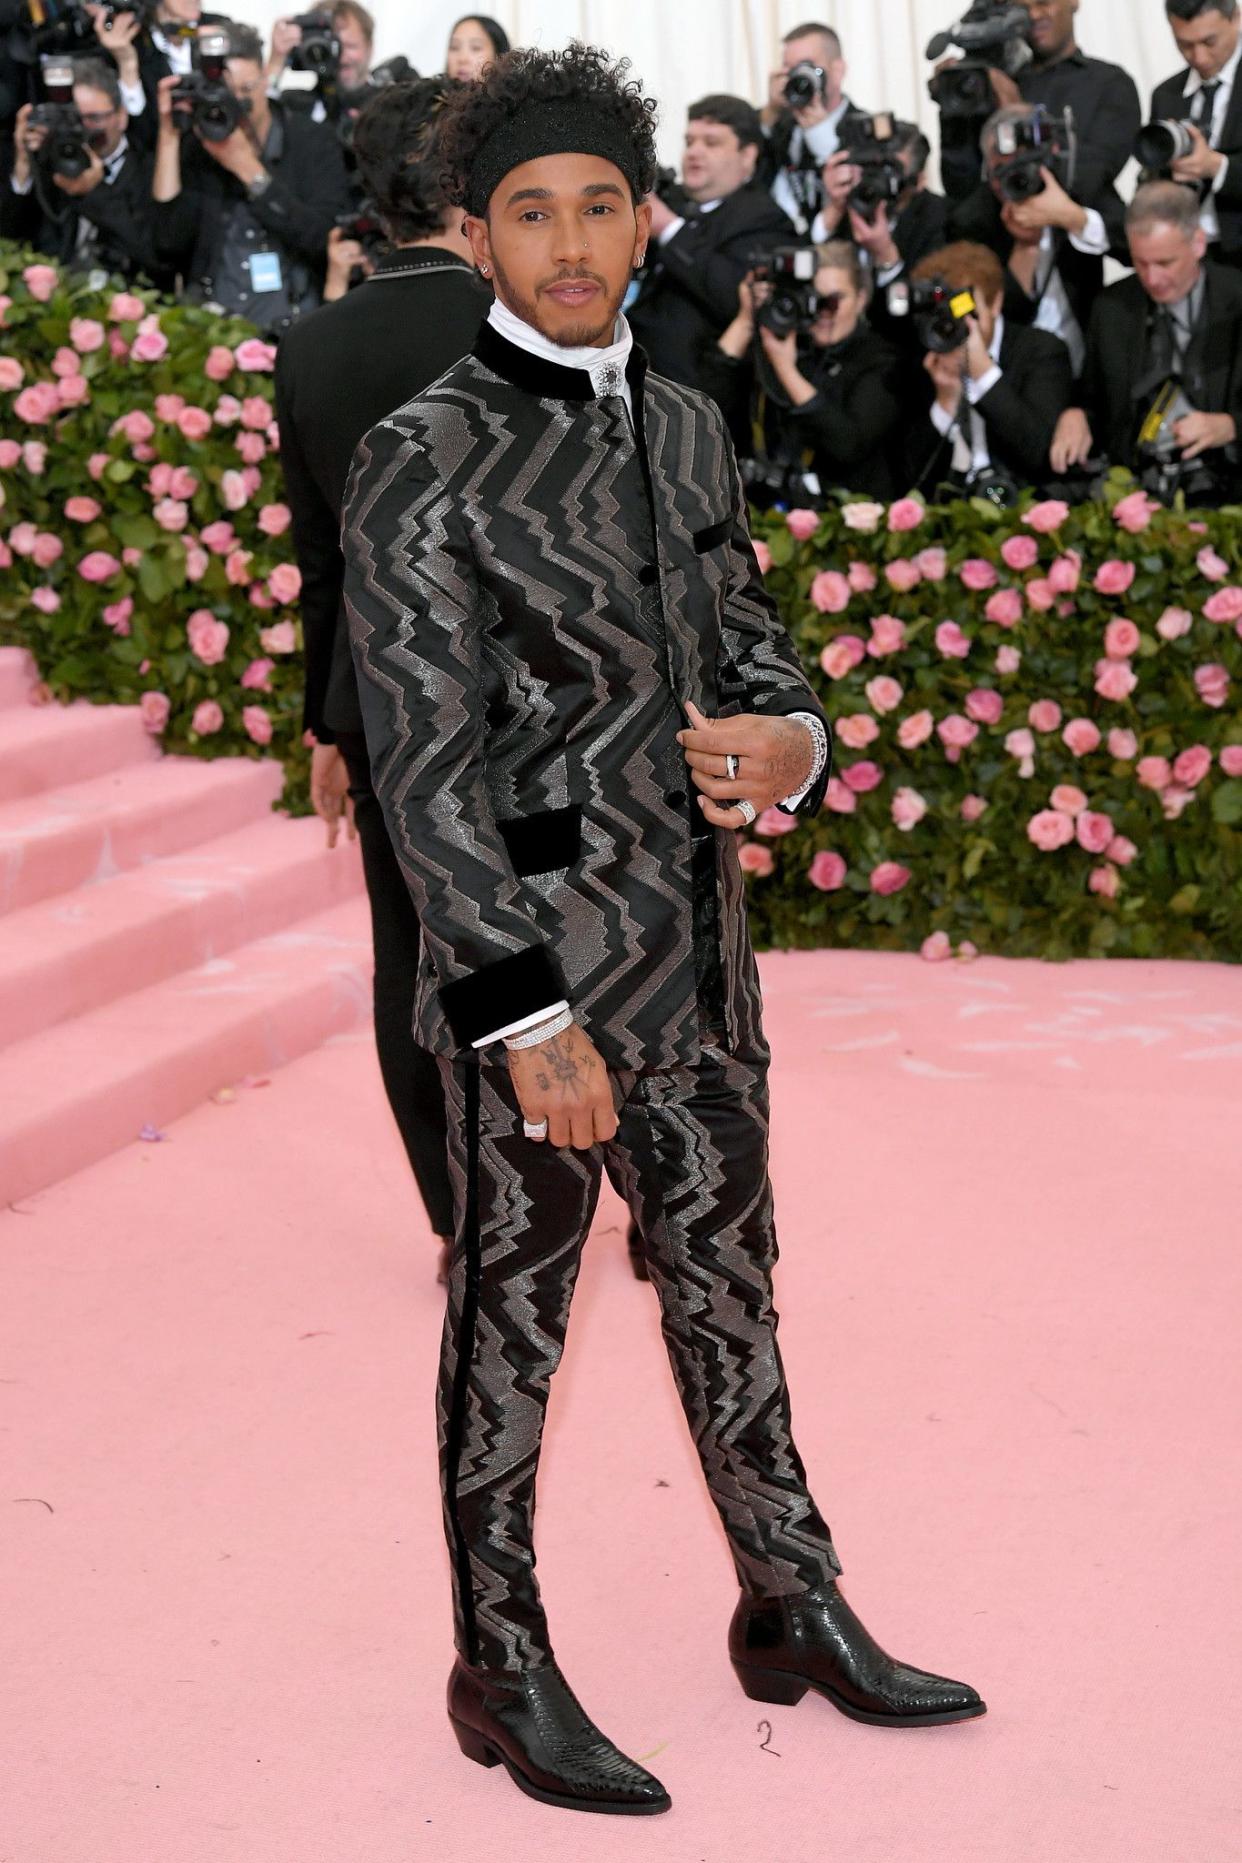 Lewis Hamilton attends The 2019 Met Gala Celebrating Camp: Notes on Fashion at Metropolitan Museum of Art on May 06, 2019 in New York City.